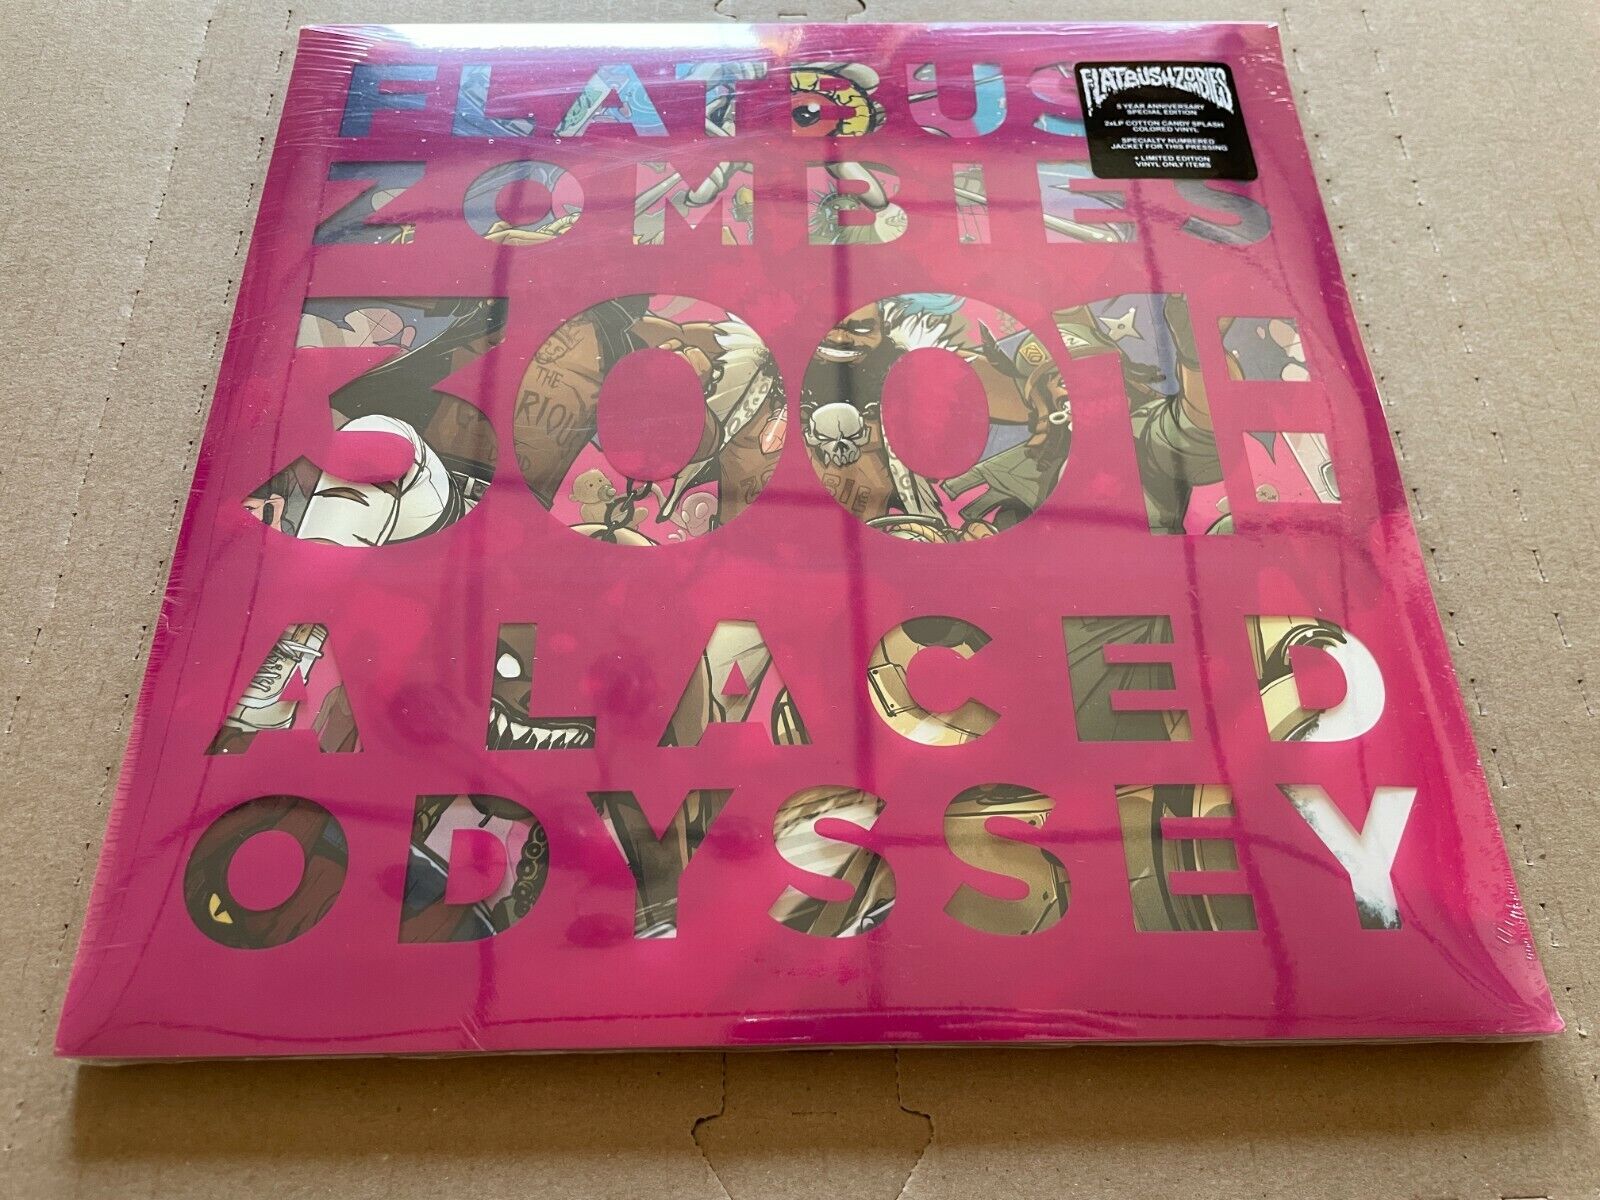 NEW RARE Flatbush Zombies - 3001: A Laced Odyssey COTTON CANDY COLORED Vinyl